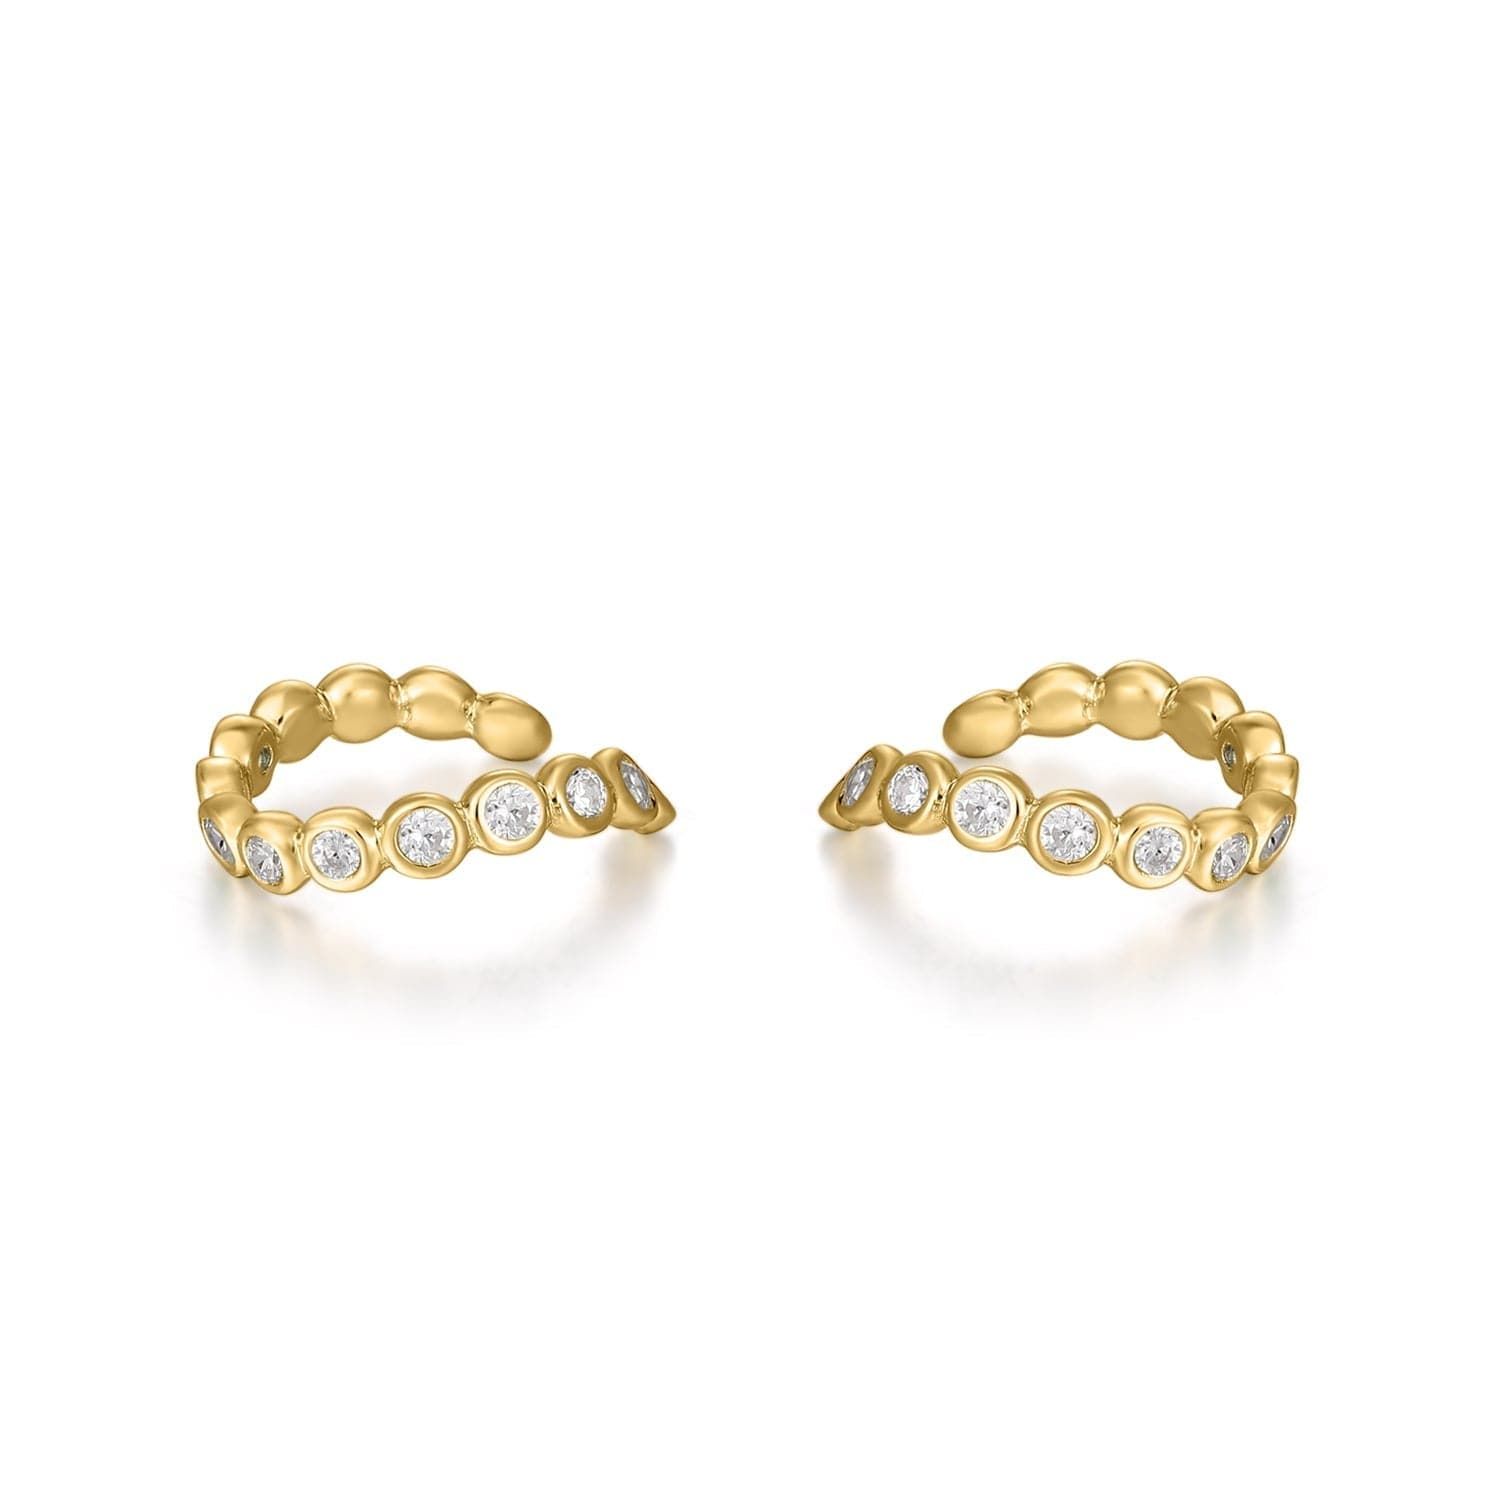 a pair of yellow gold and diamond earrings